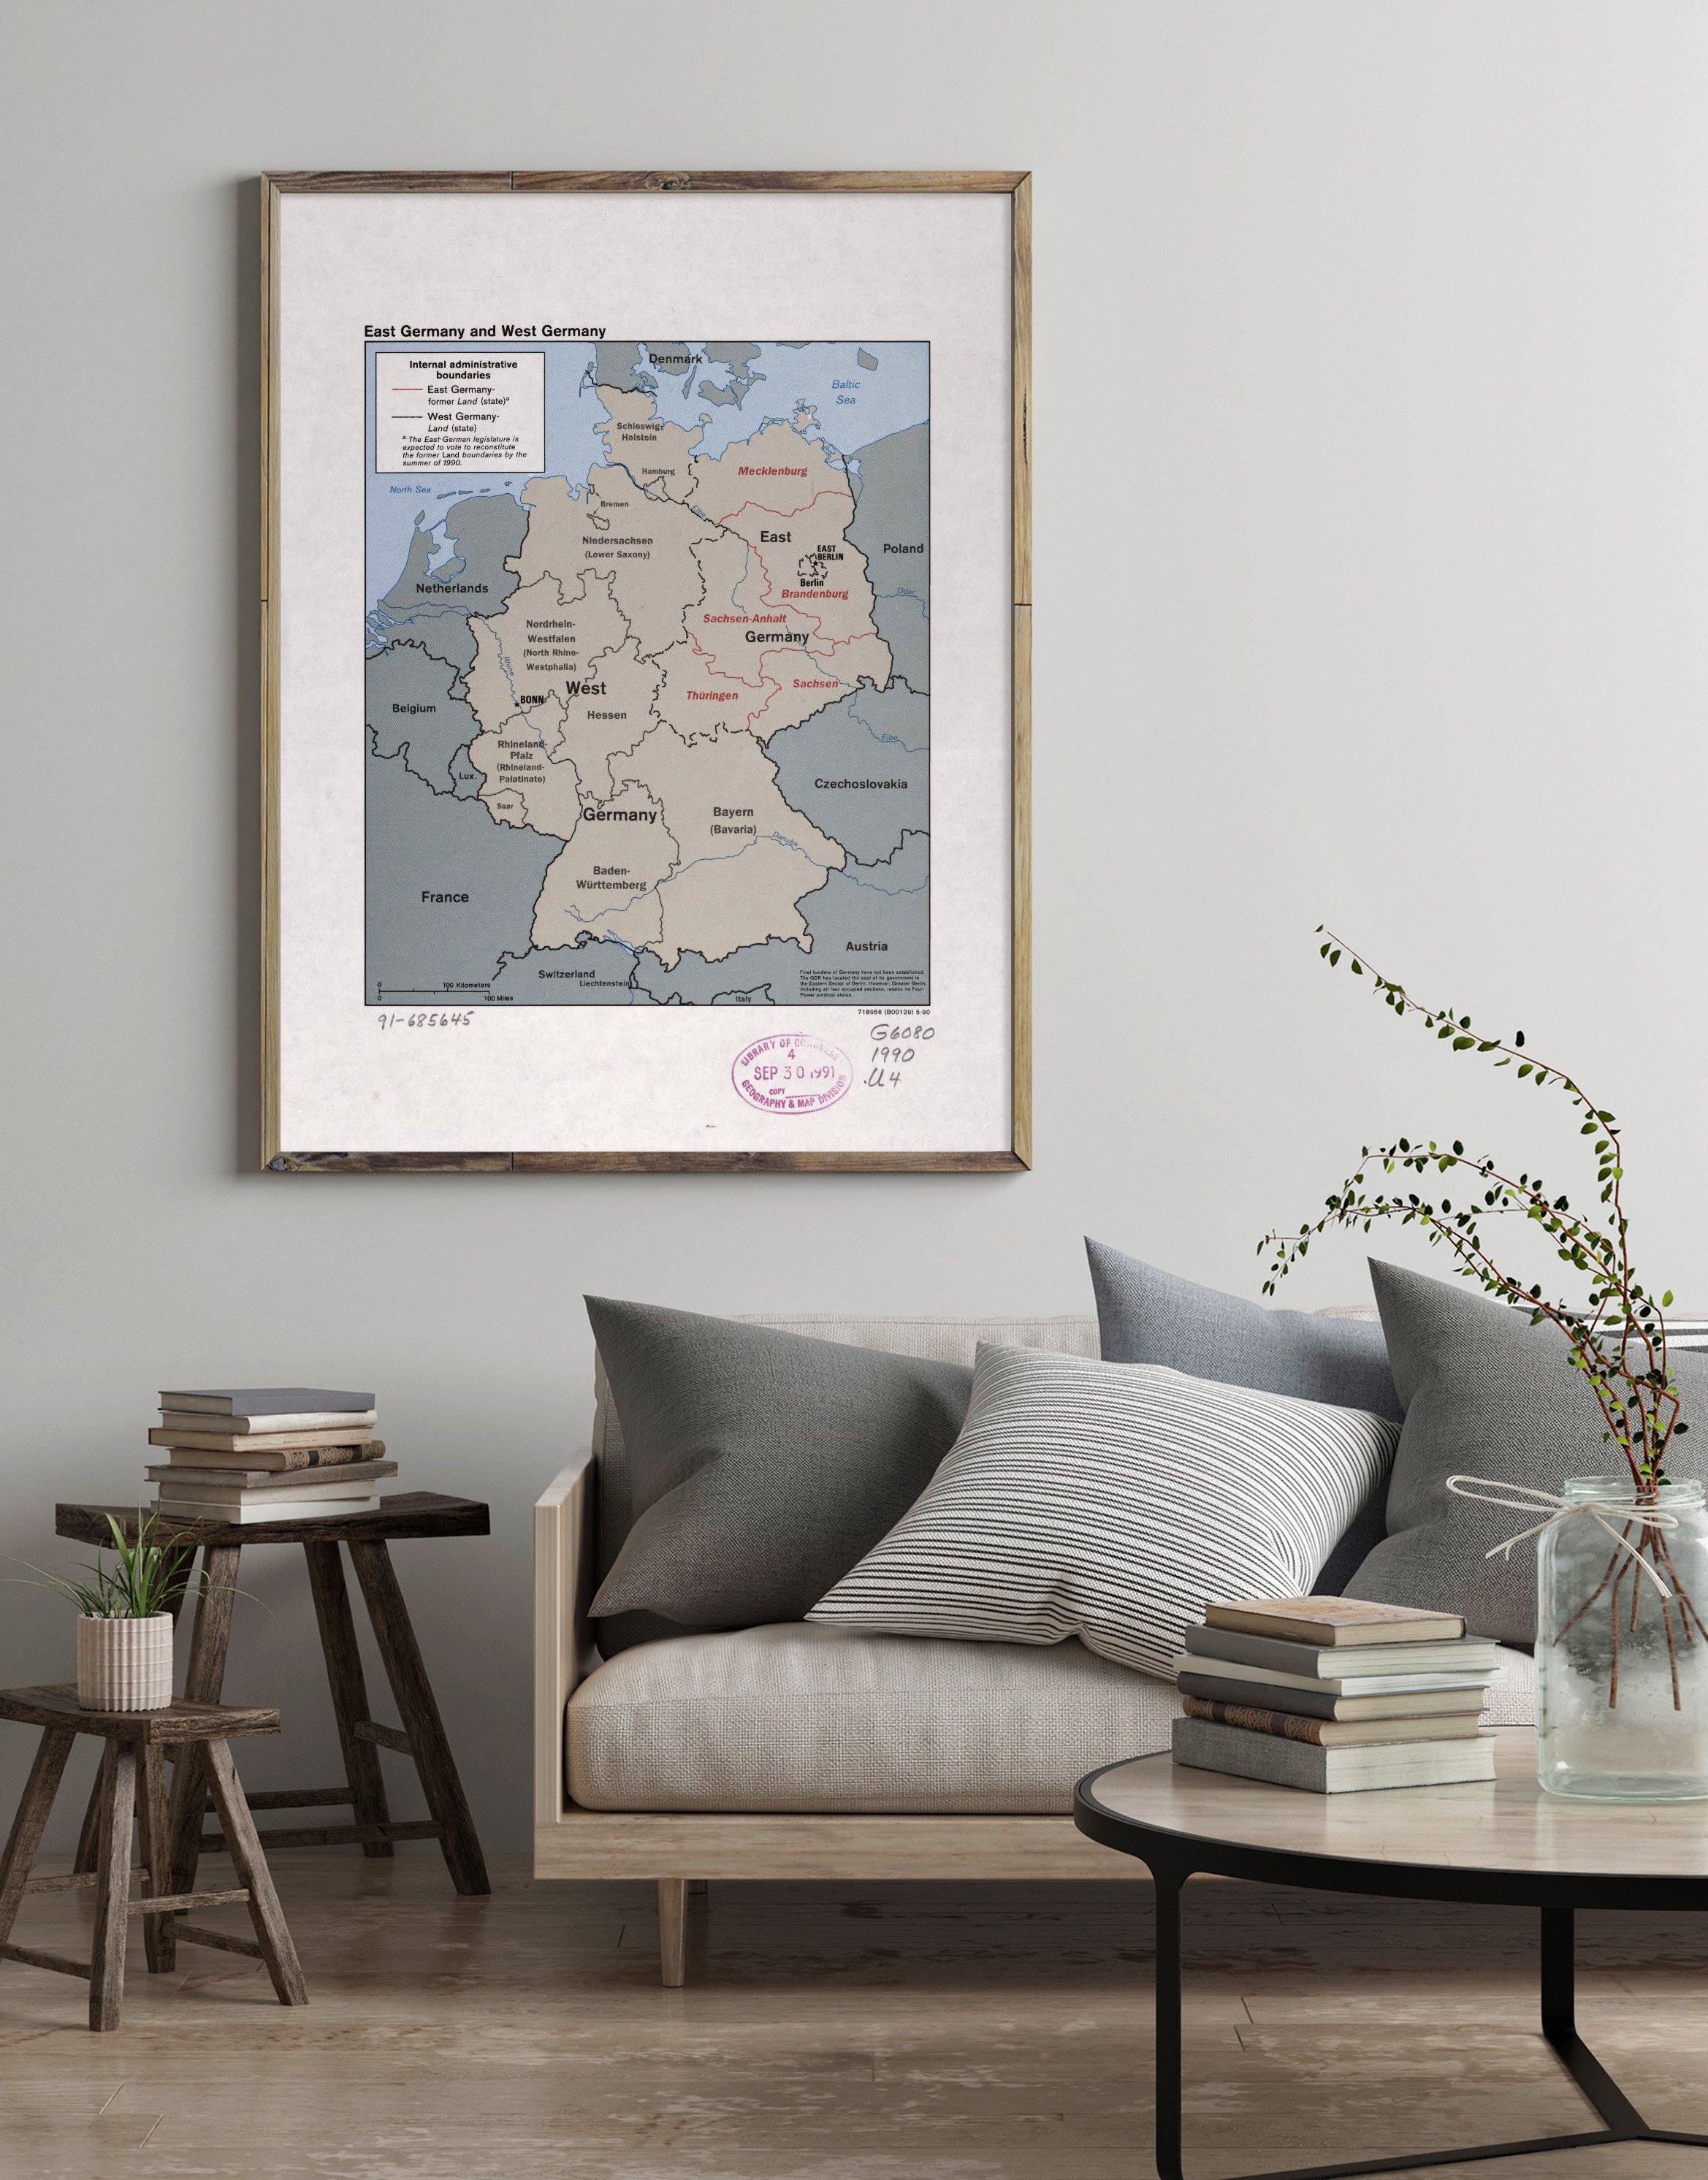 1990 Map| East Germany and West Germany| Administrative and Political - New York Map Company